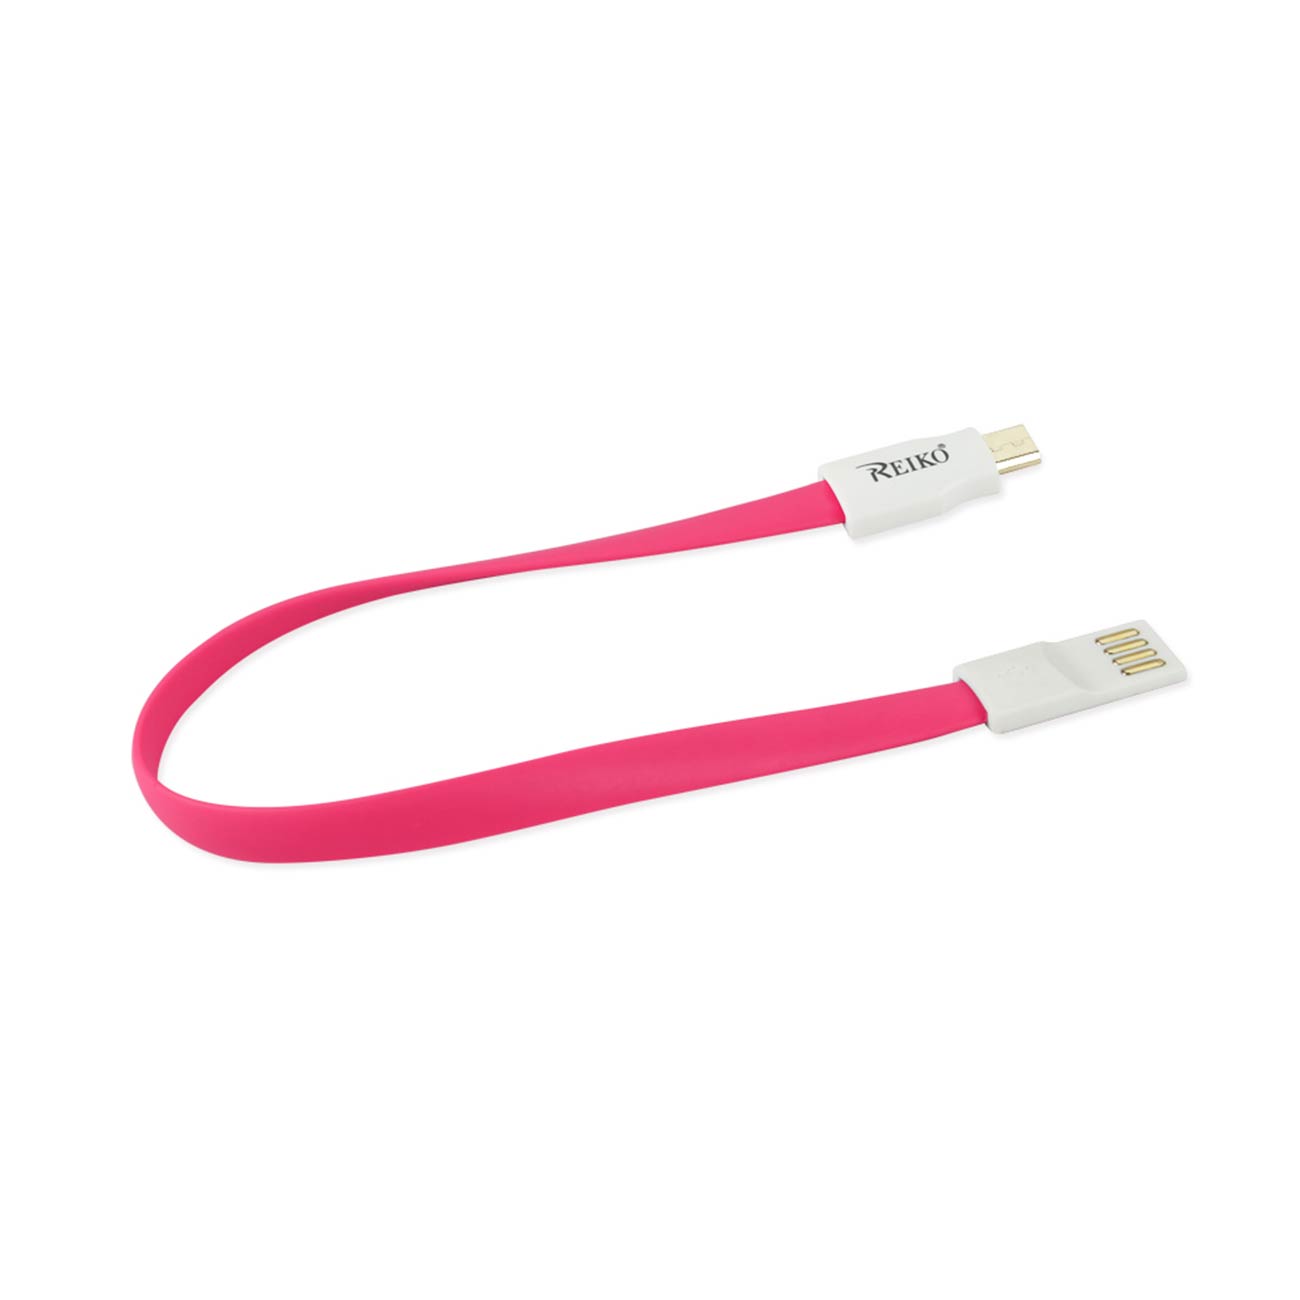 Data Cable USB Micro Flat Magnetic Gold Plated 9670t 0.7 Foot Carriers AT&T Blackberry Style Hot Pink Color